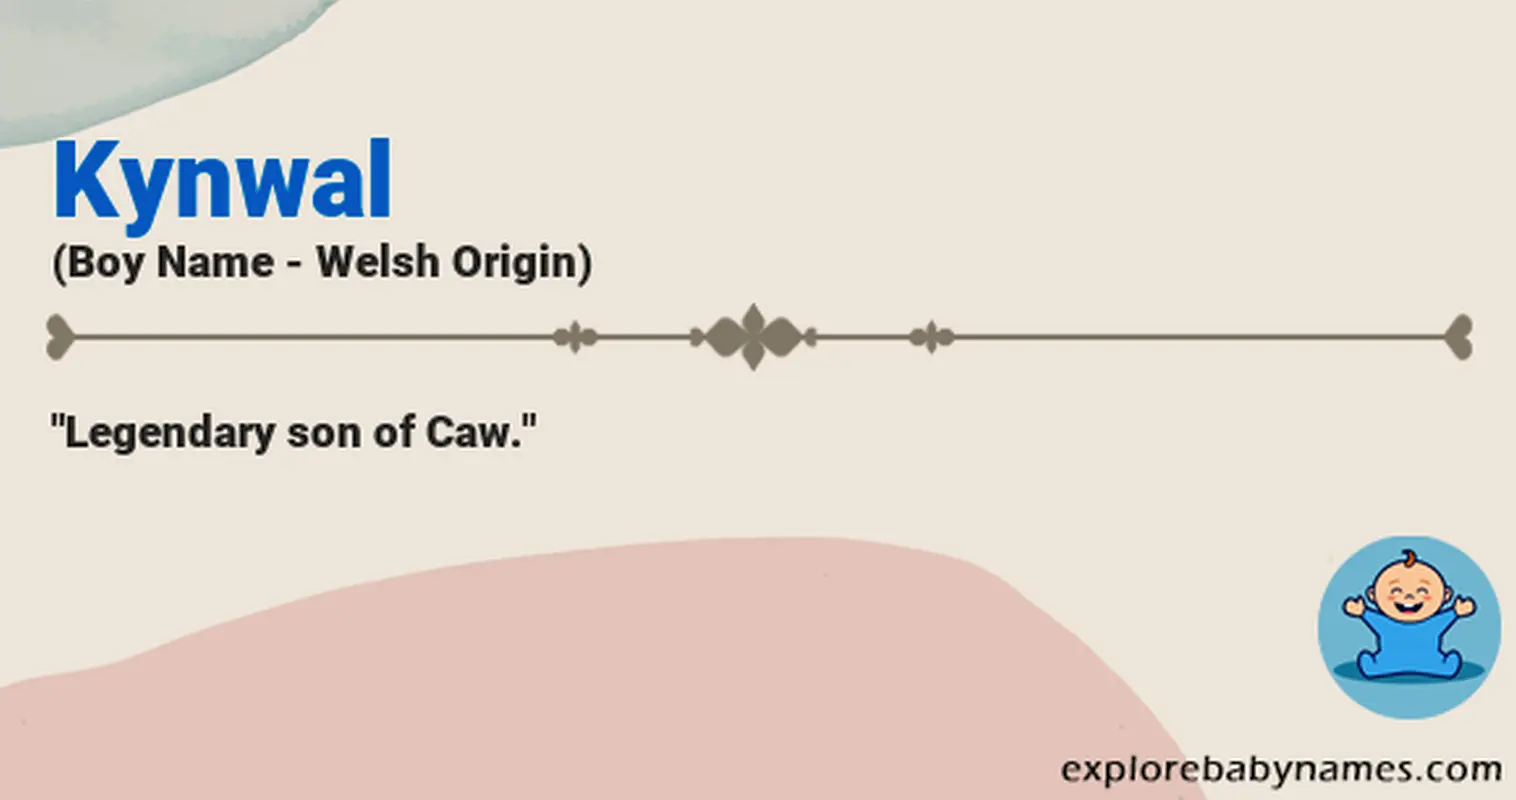 Meaning of Kynwal